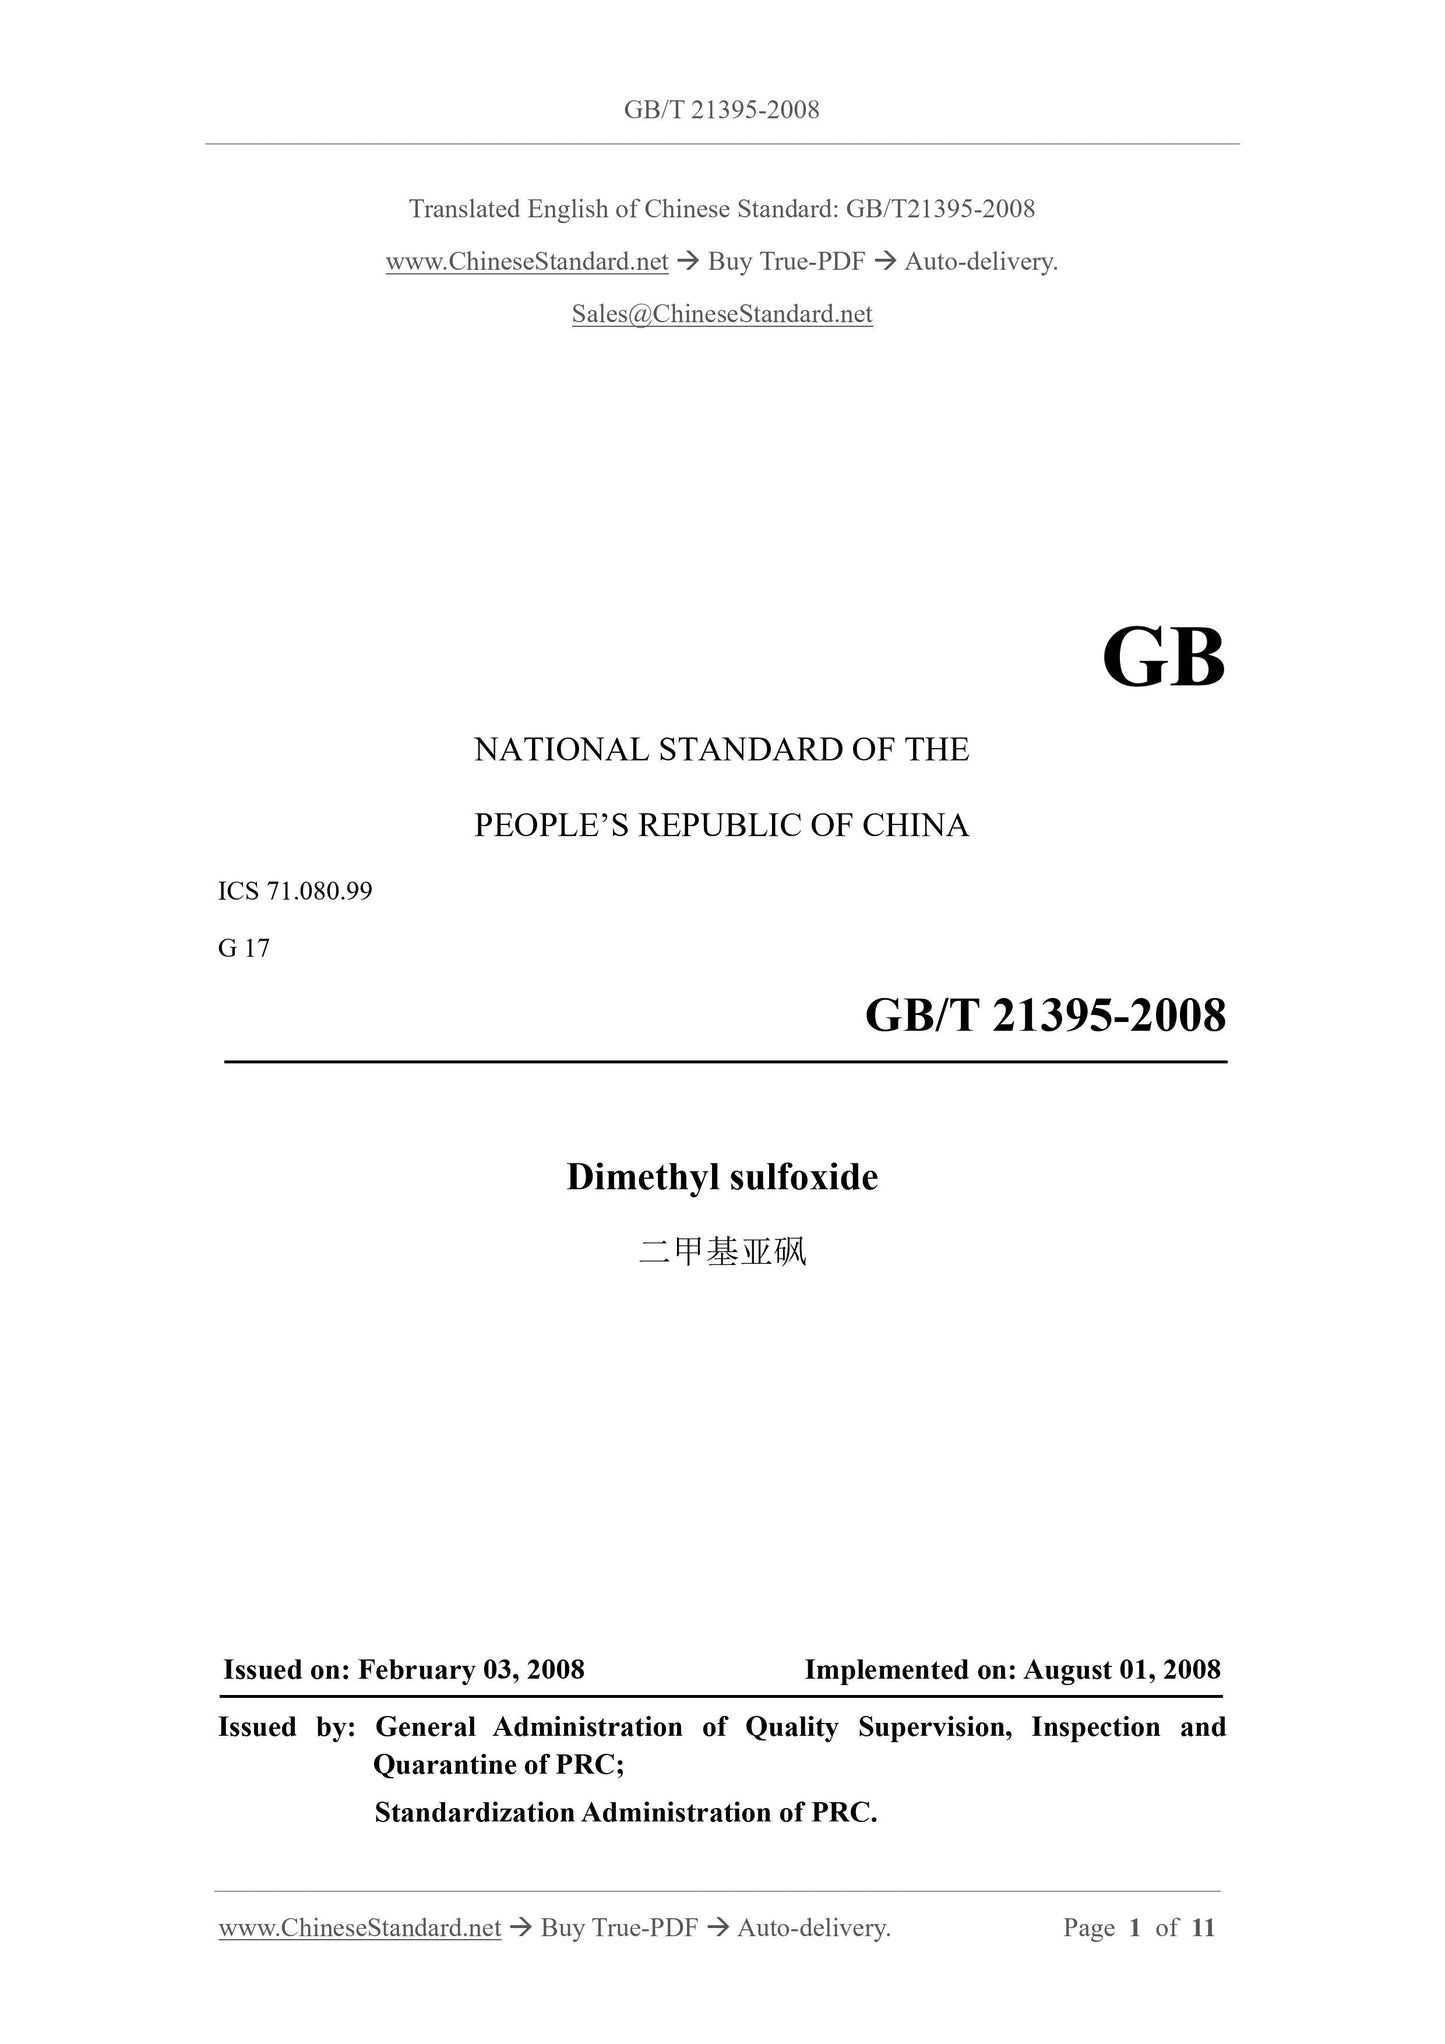 GB/T 21395-2008 Page 1